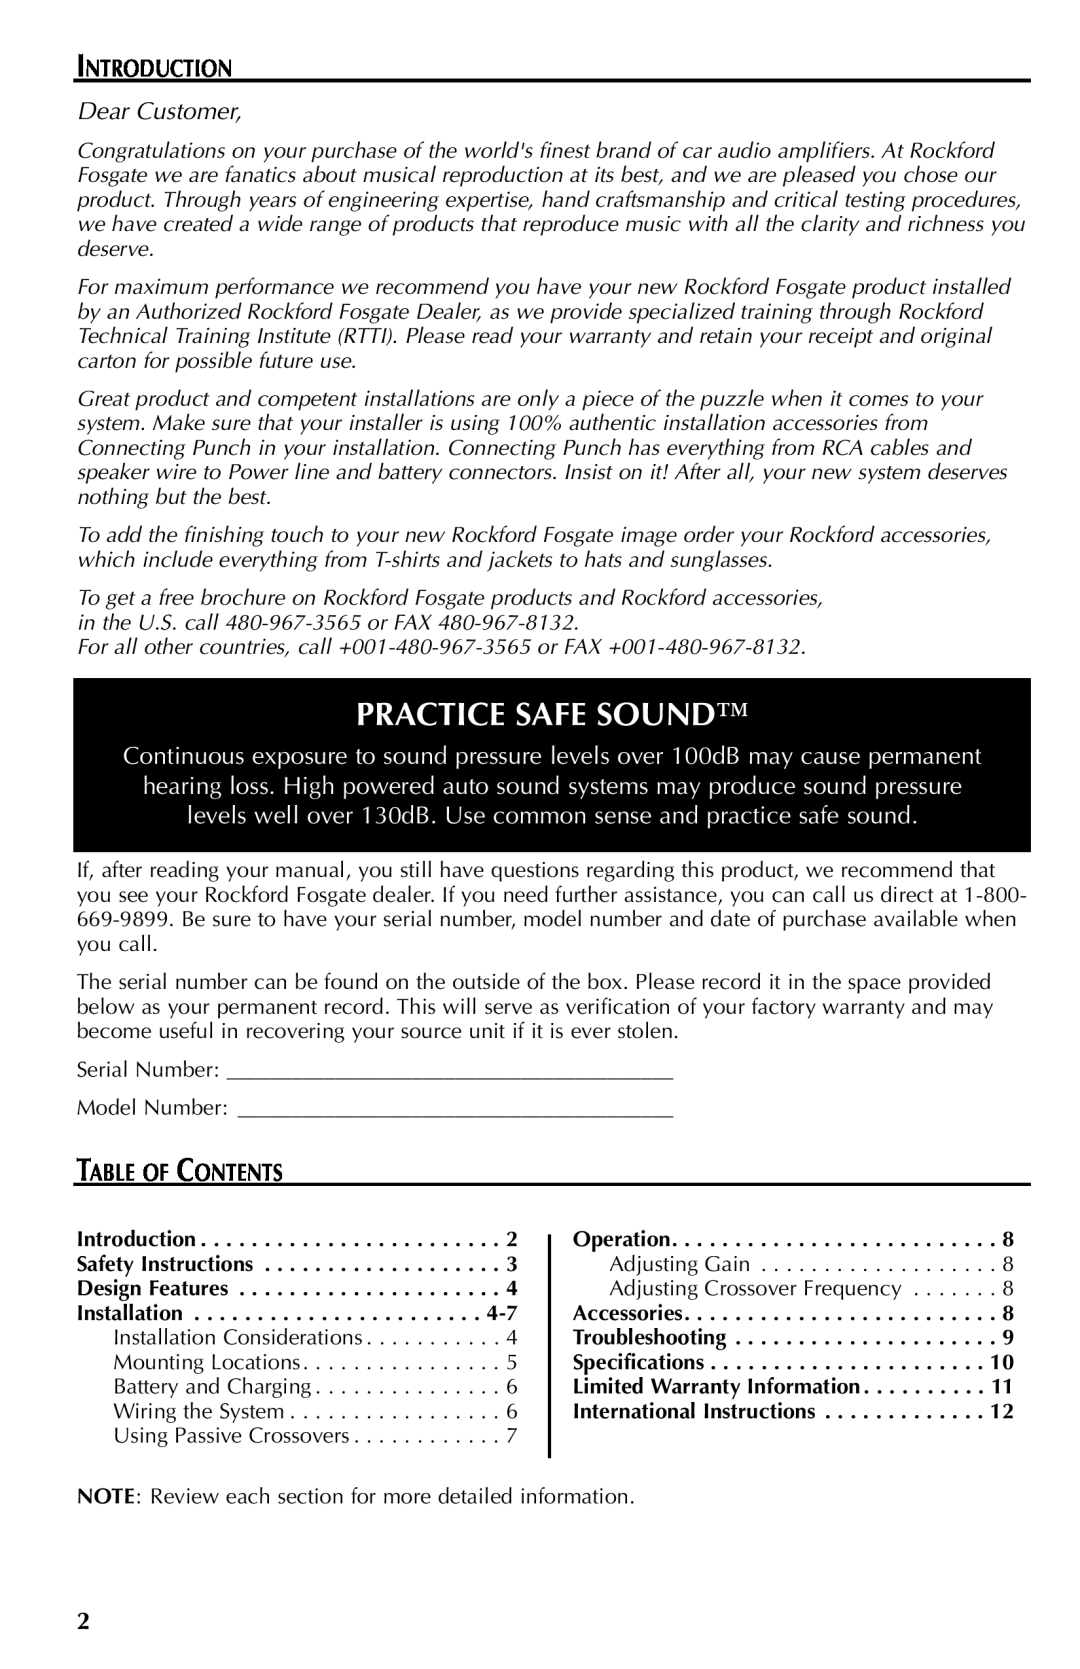 Rockford Fosgate Mono Amplifier manual Practice Safe Sound, Introduction, Table Of Contents 